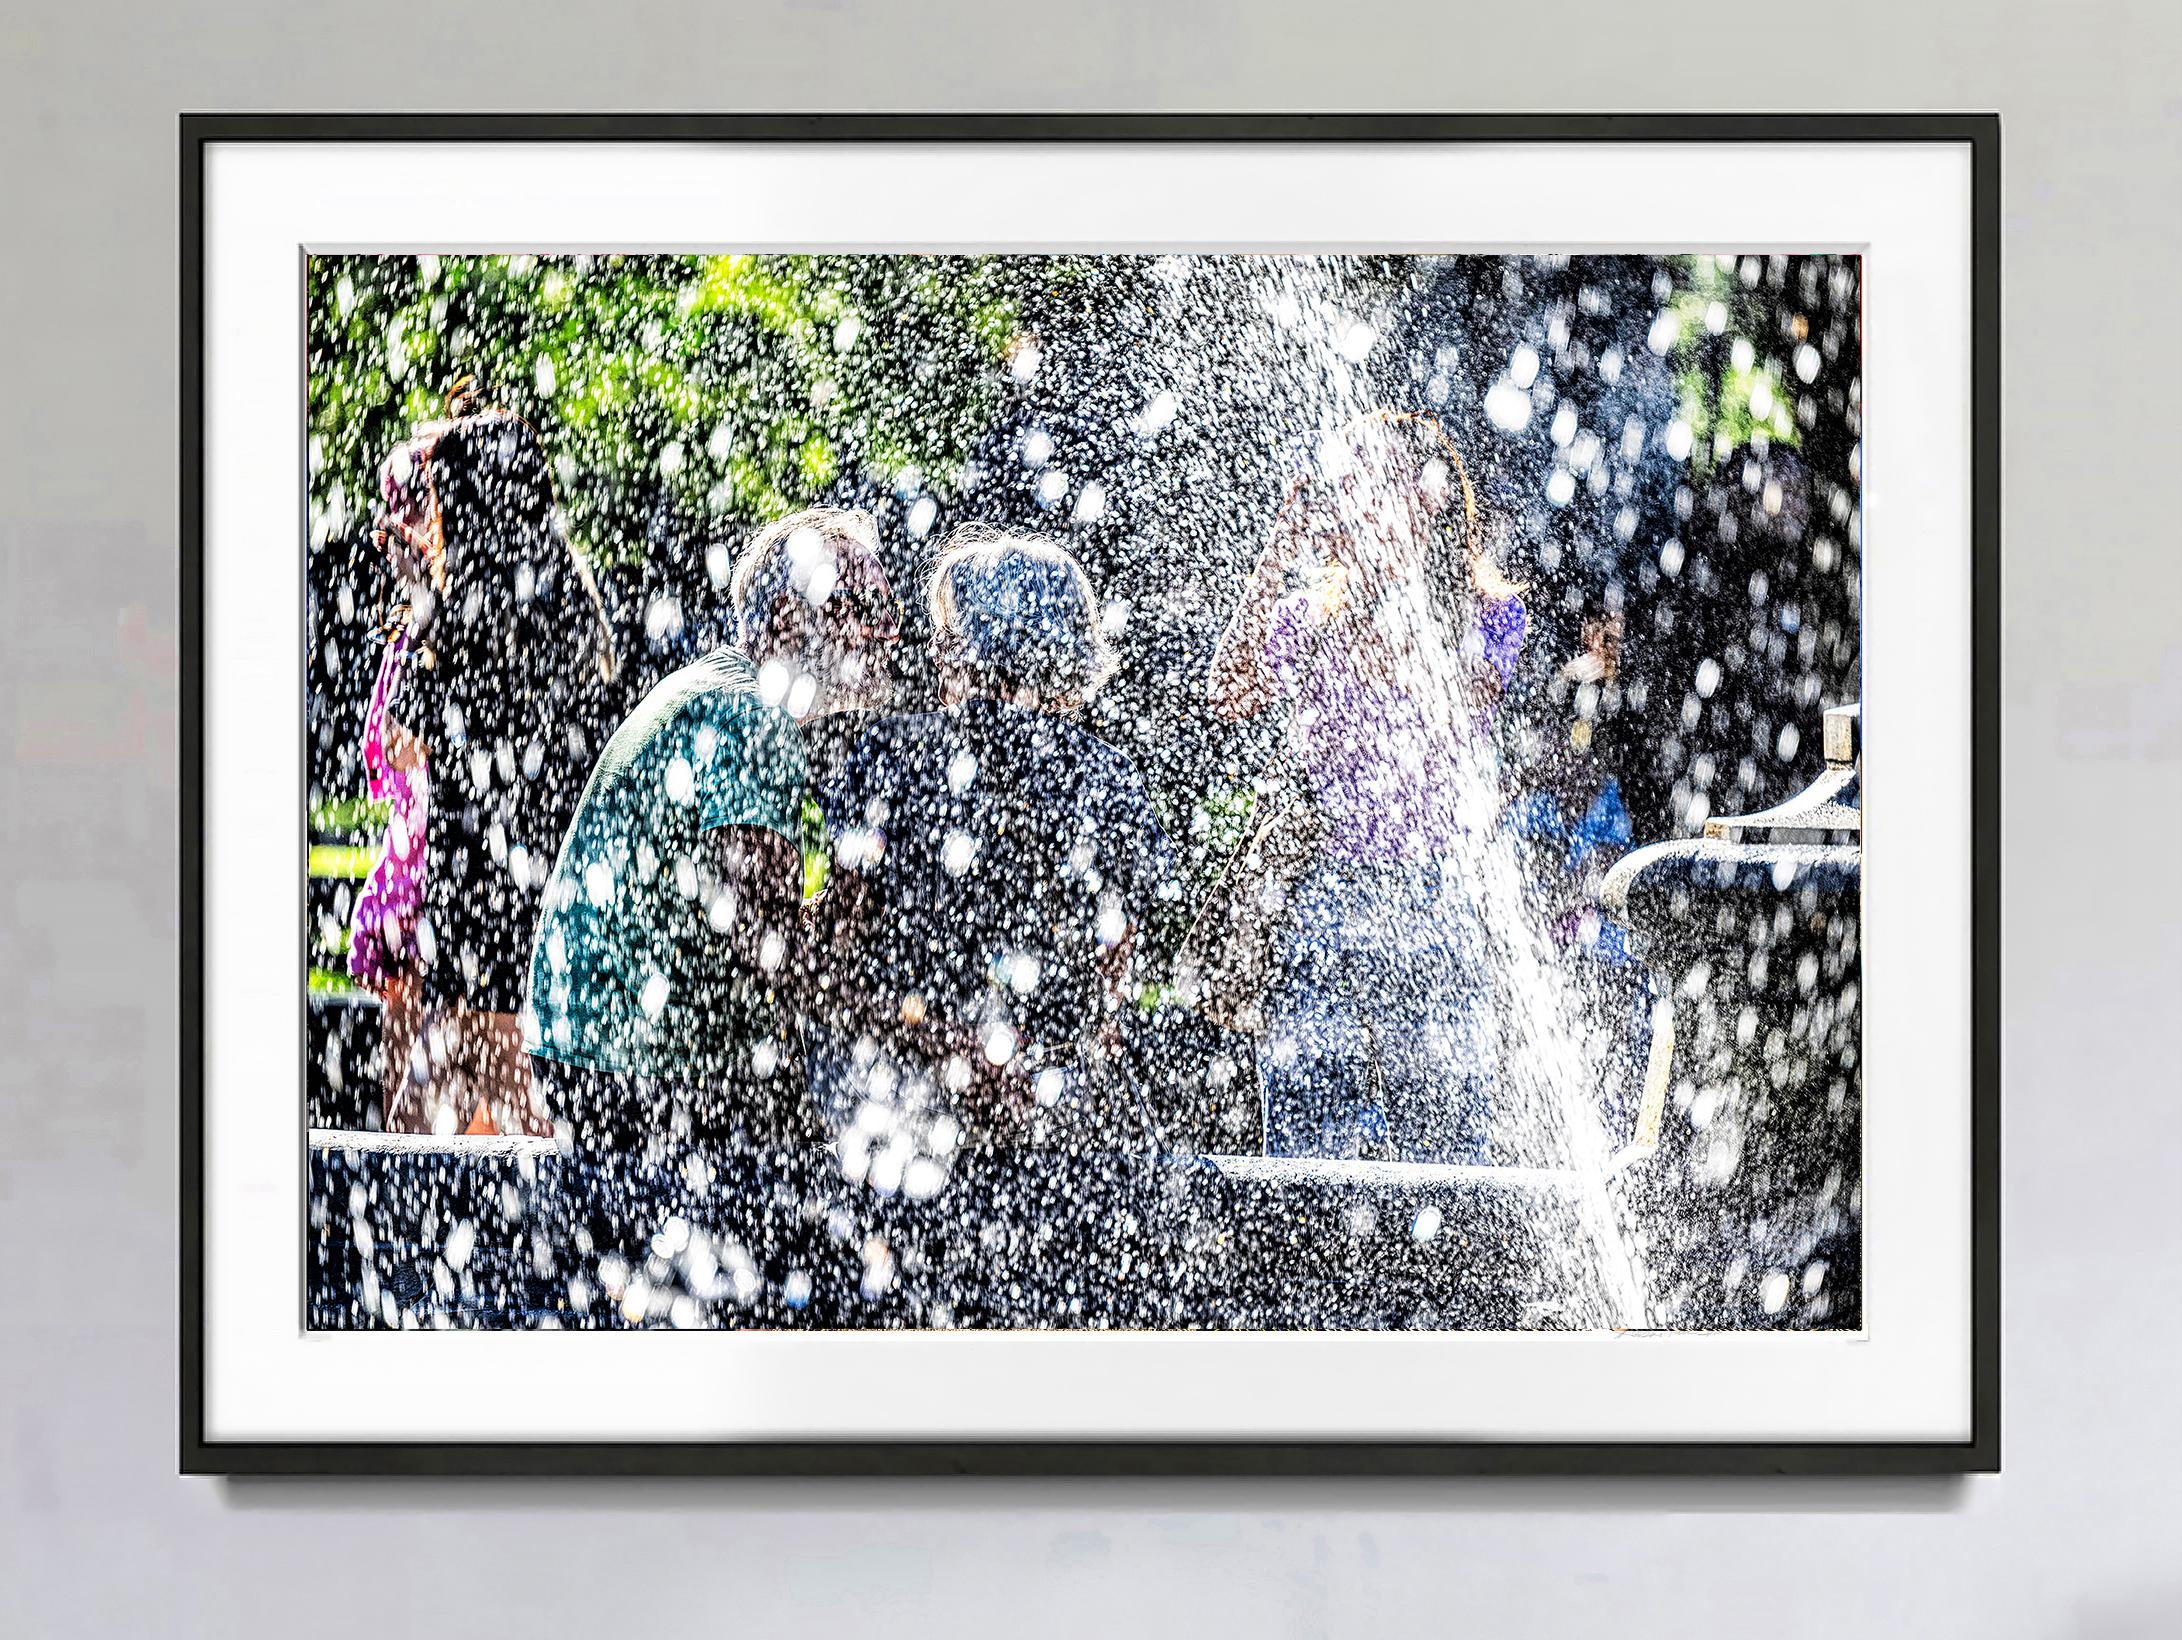 Blurry figures are vaguely seen through the dancing waters of the Washington Square Fountain in New York.  Raking light strikes the water streams, which results in dots and dashes of  Pointillist-like brushstrokes of light and color.  The immediate